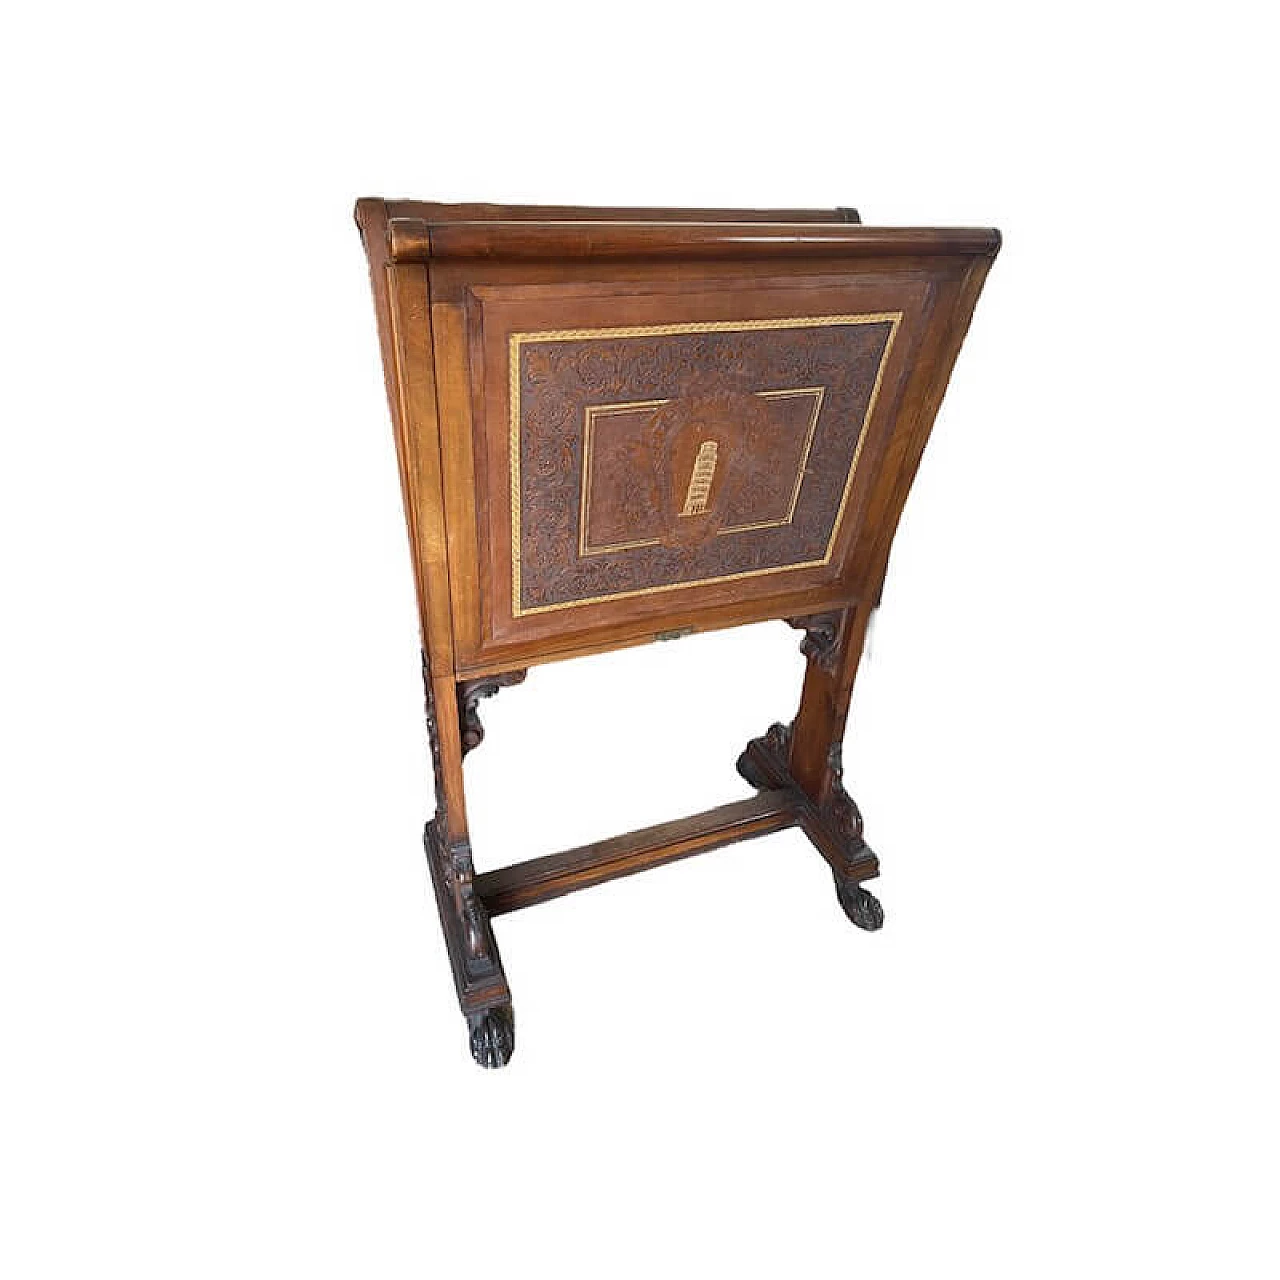 Walnut and leather magazine rack by Spicciani, late 19th century 1